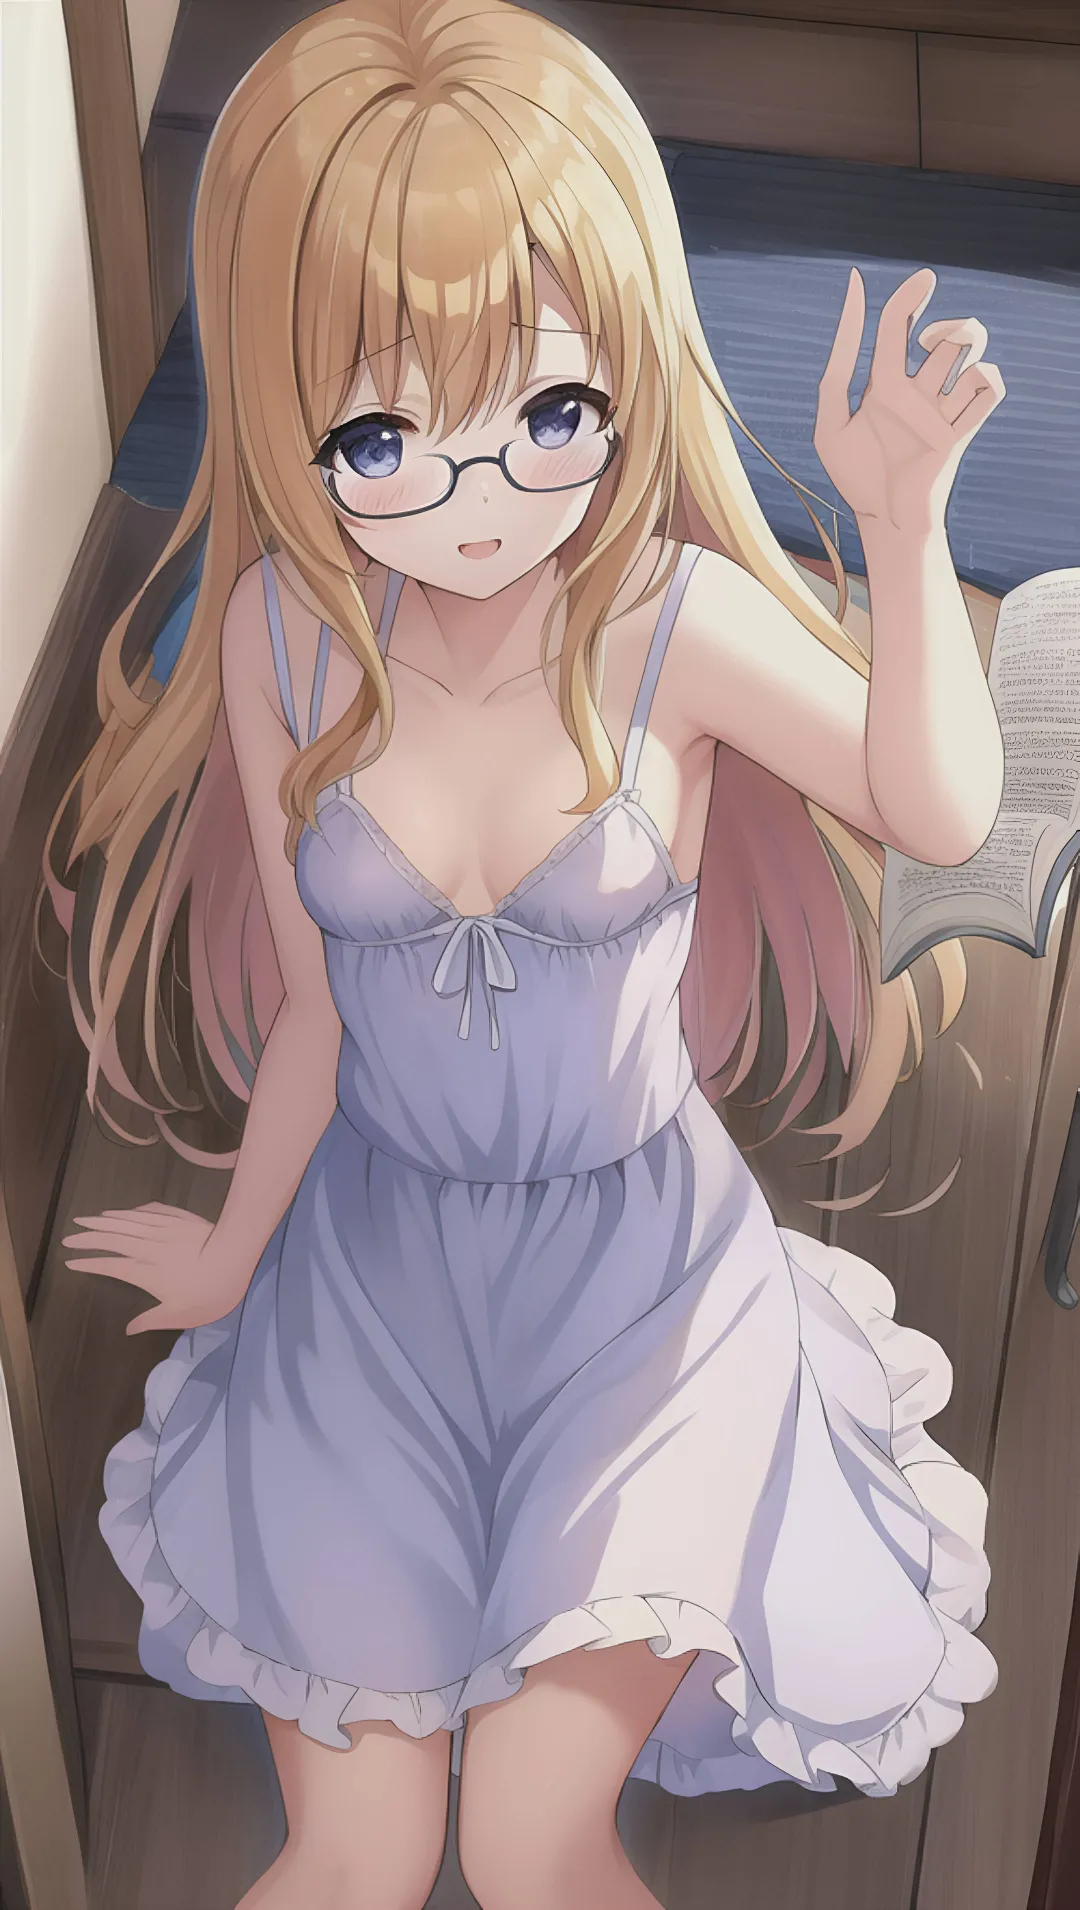 thumb for Anime Girl With Sunglasses Wallpaper